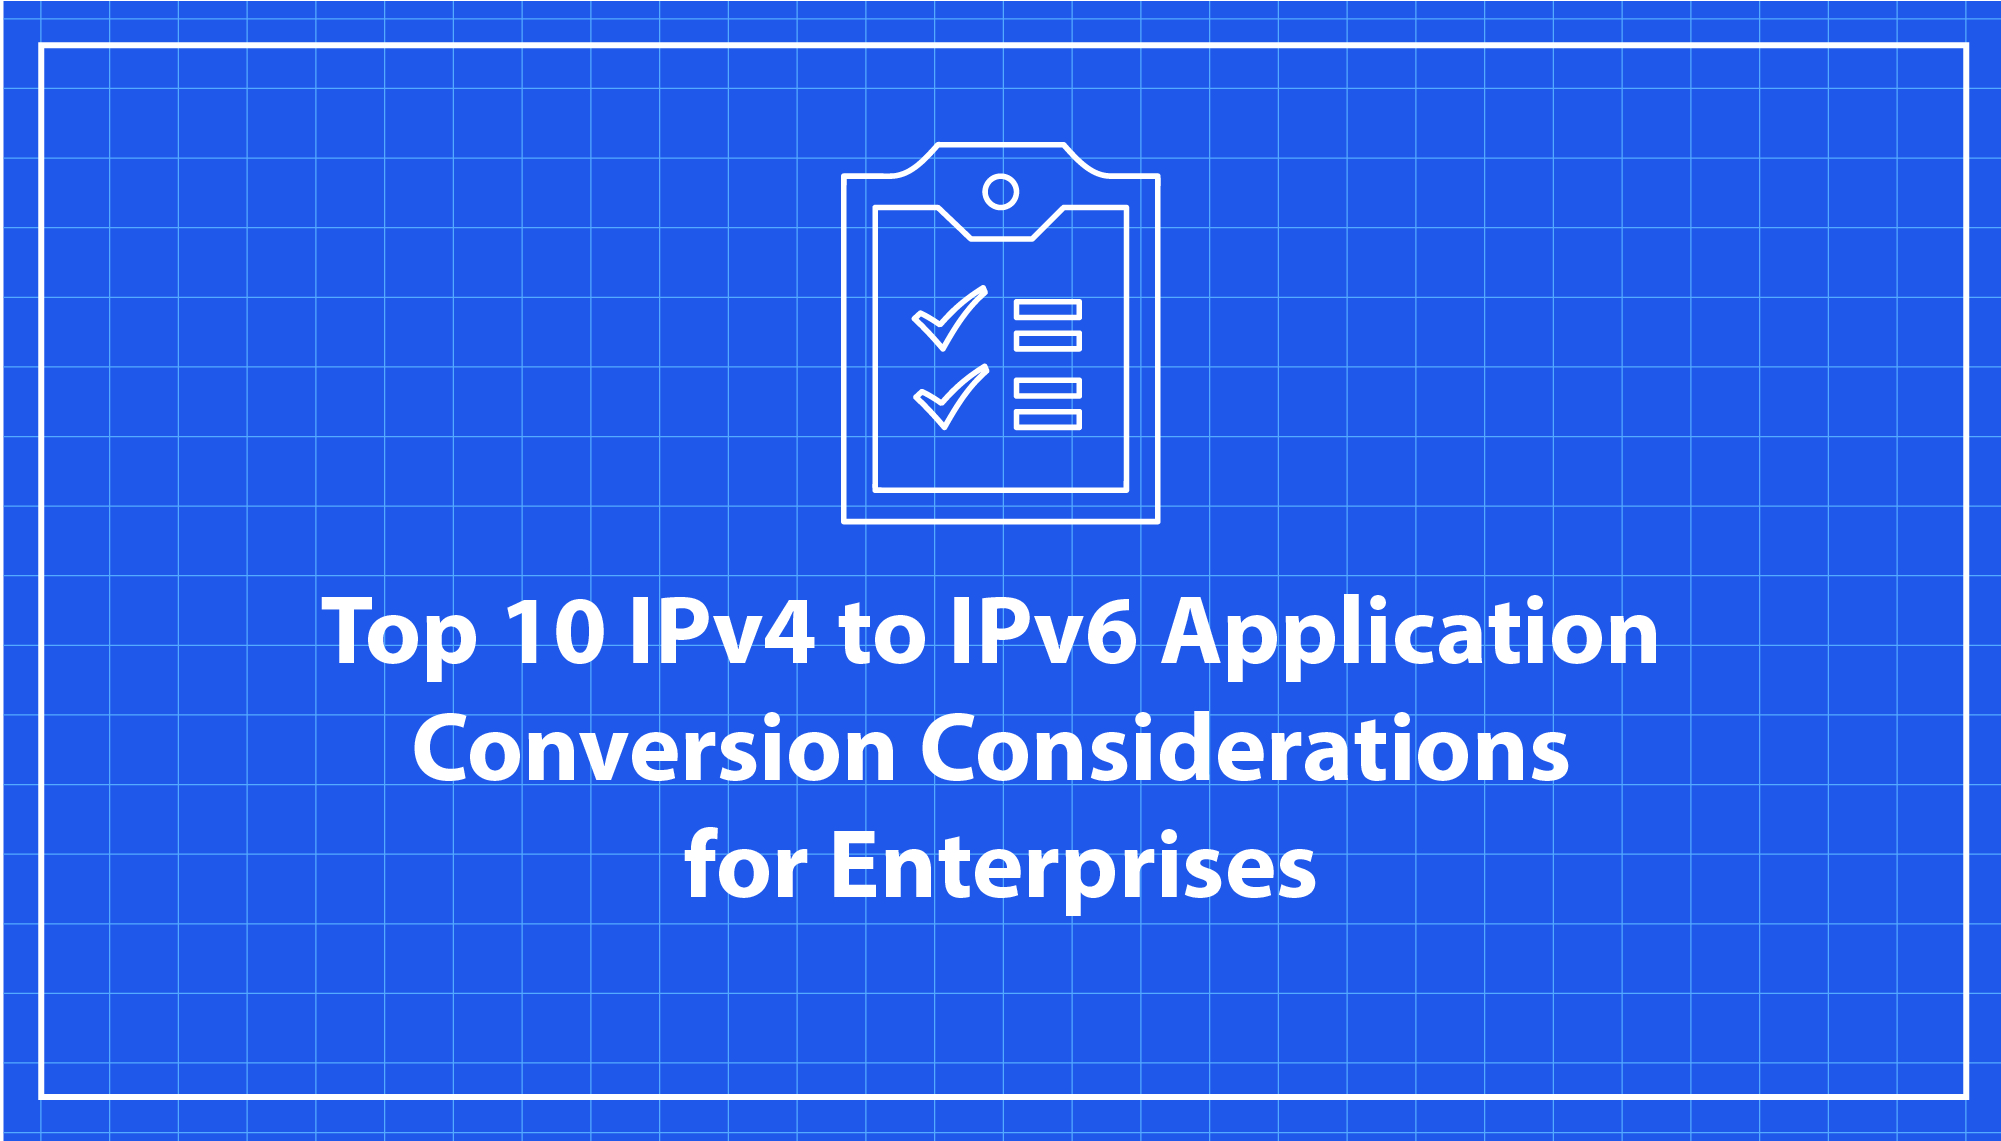 Top 10 IPv4 to IPv6 Application Conversion Considerations for Enterprises